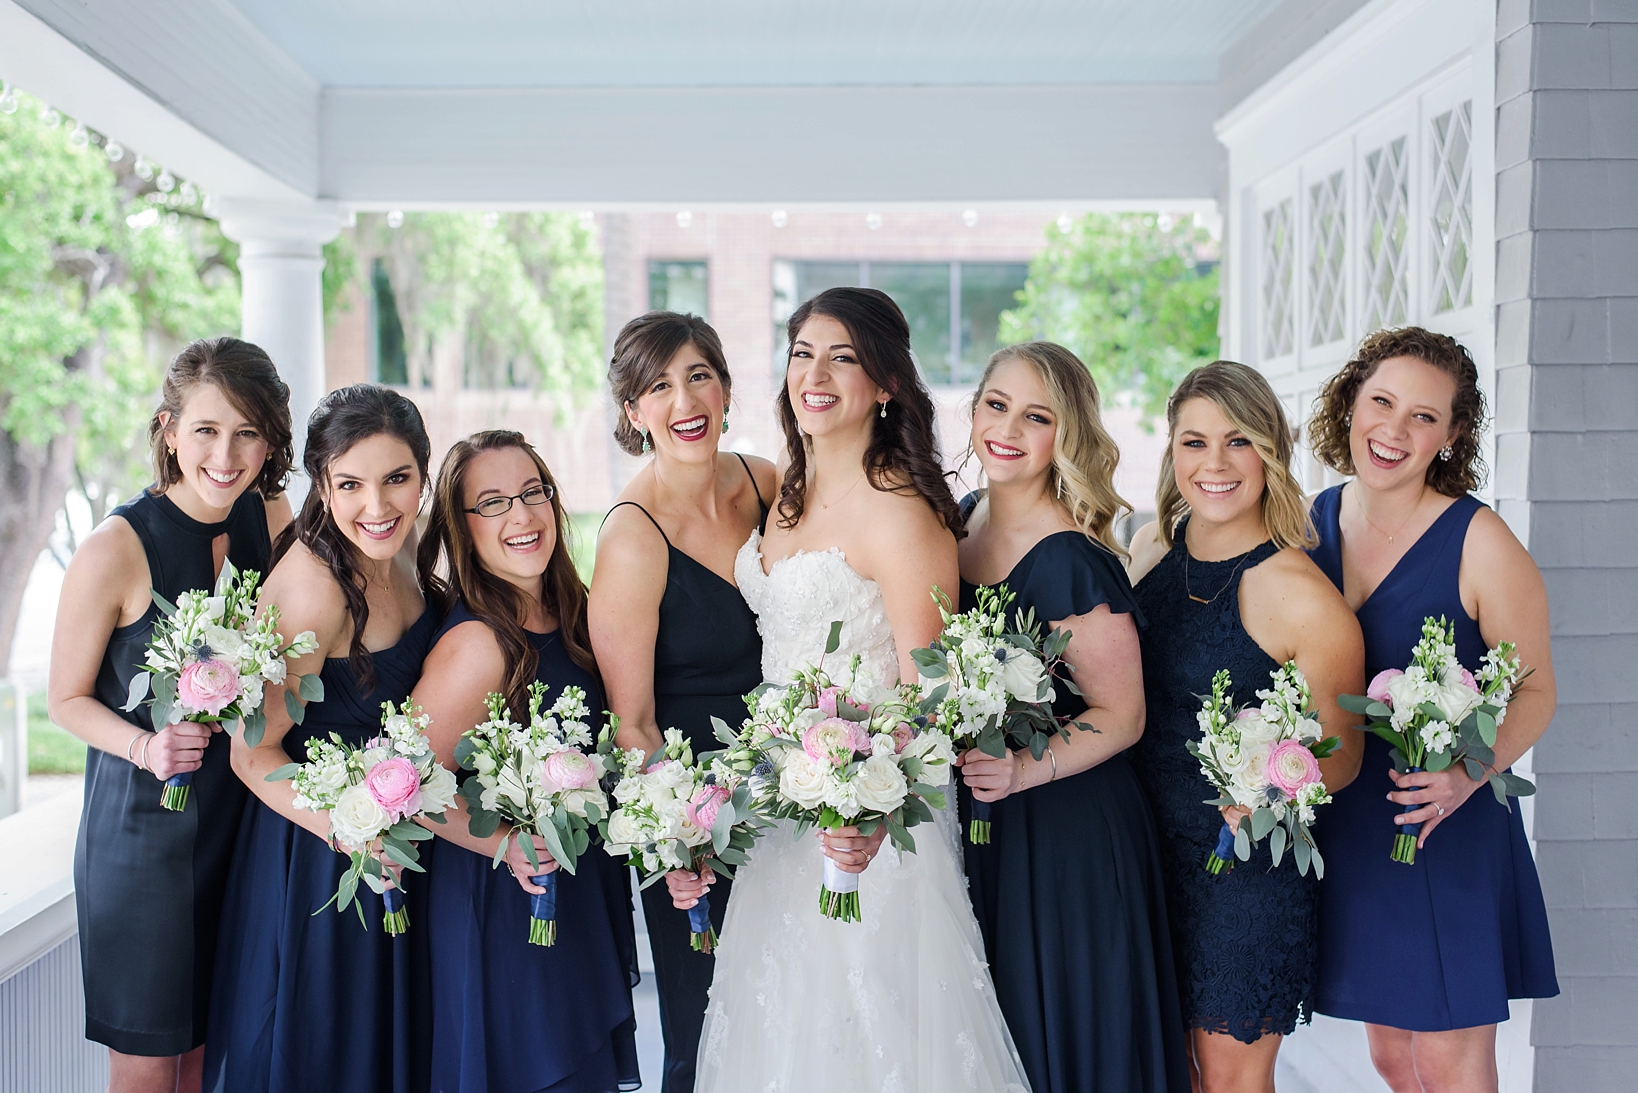 Beautiful Bride and Bridesmaids holding their floral bouquets in navy blue dresses